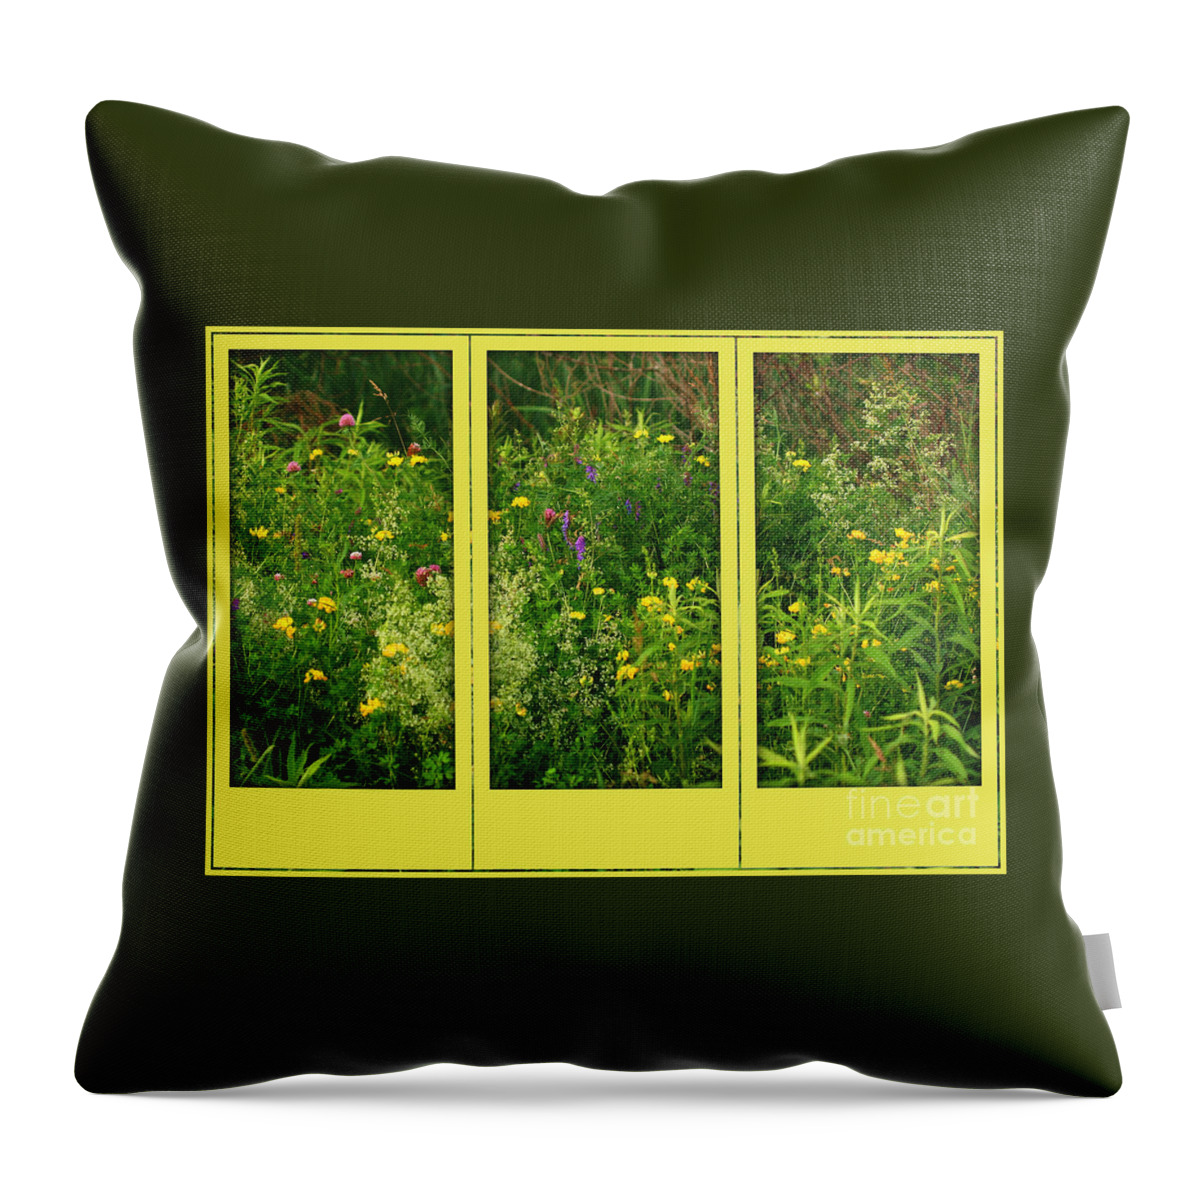 Flower Throw Pillow featuring the photograph Wildflowers Through A Window by Smilin Eyes Treasures